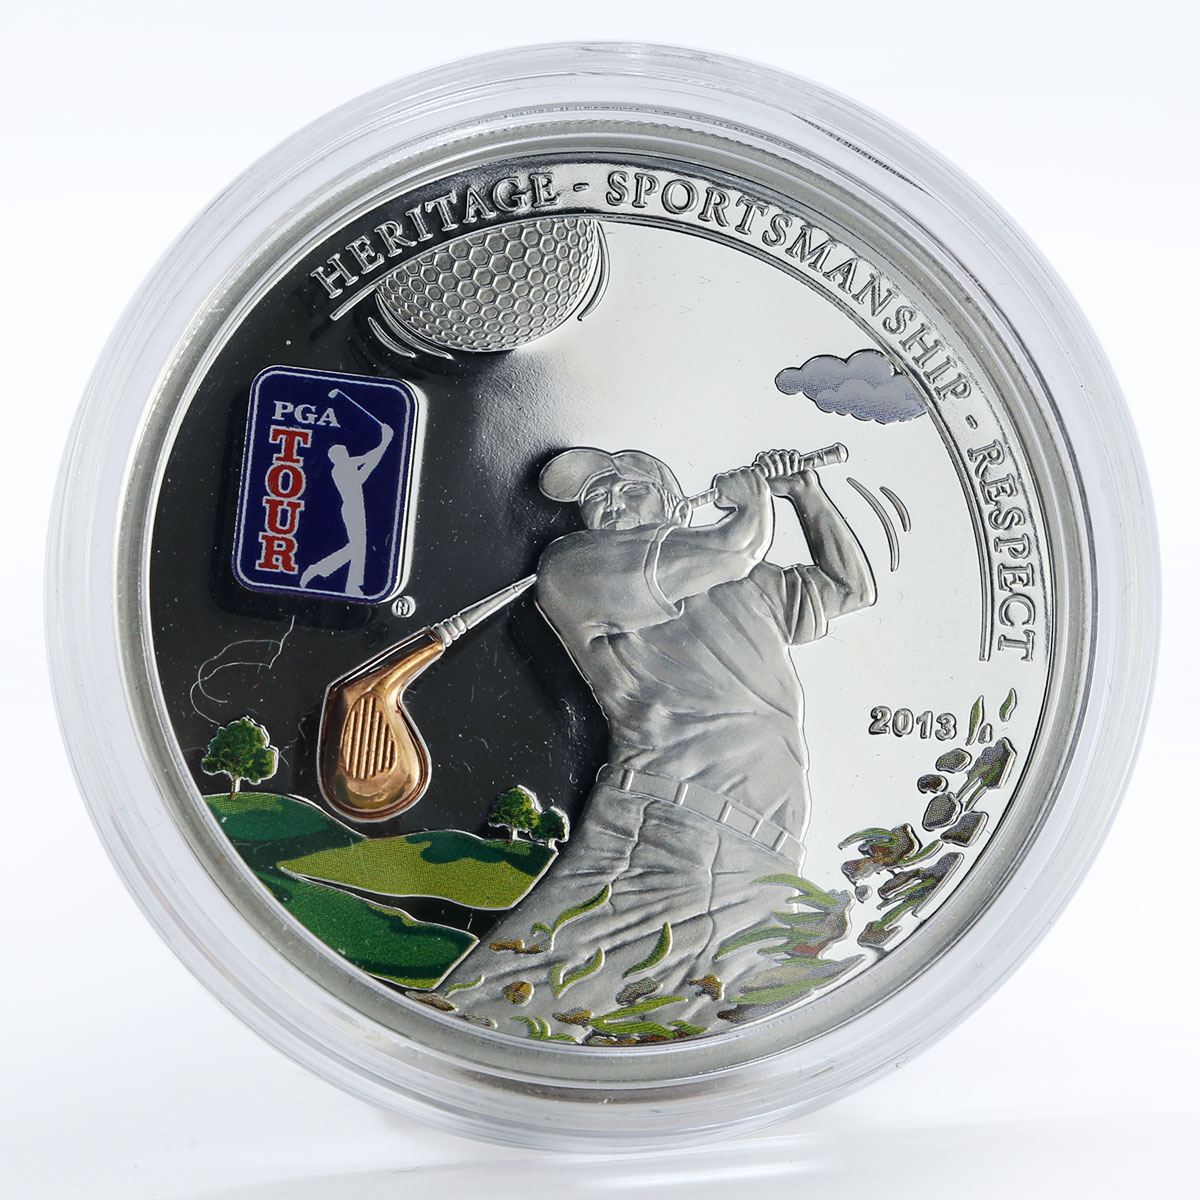 Cook Islands 5 dollars PGA Tour - Golf Club silver proof coin 2013